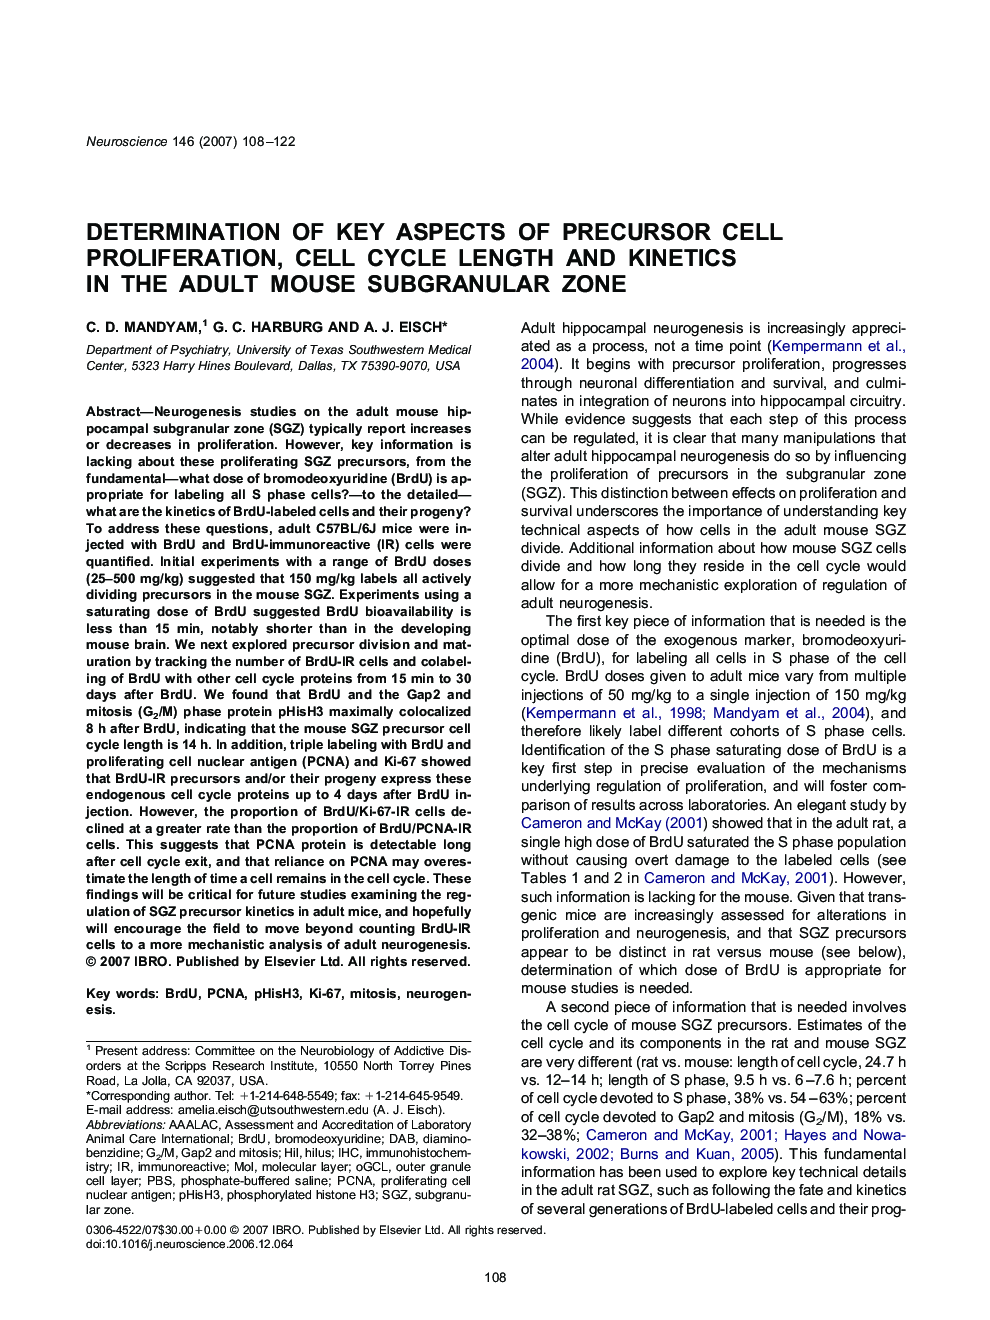 Determination of key aspects of precursor cell proliferation, cell cycle length and kinetics in the adult mouse subgranular zone